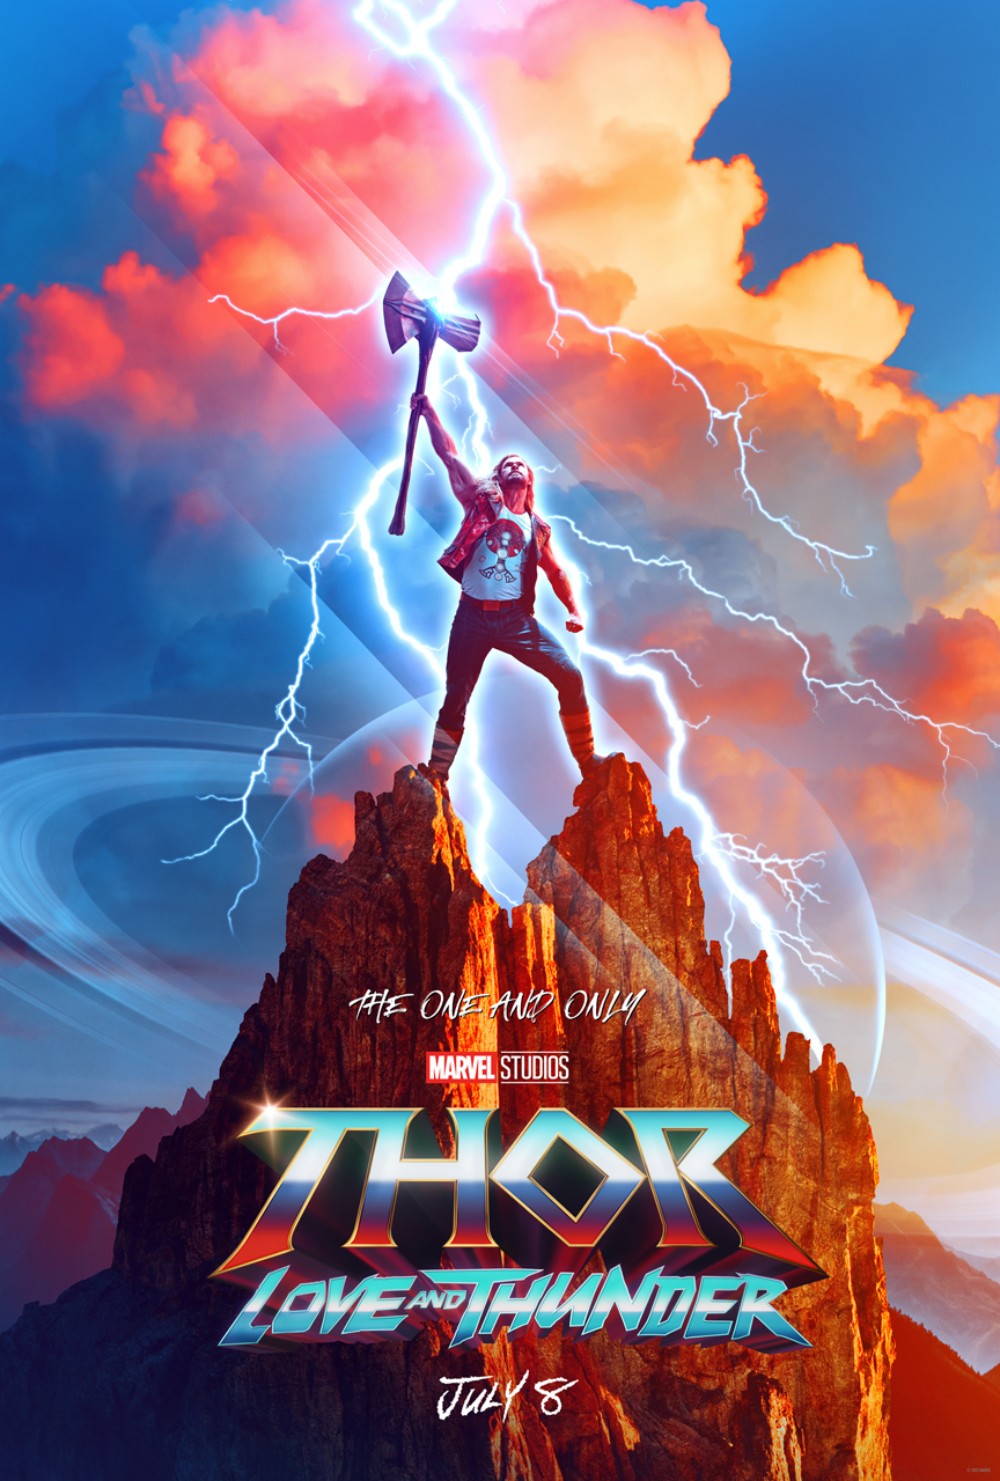 WWK-thor-love-and-thunder-trailer-1